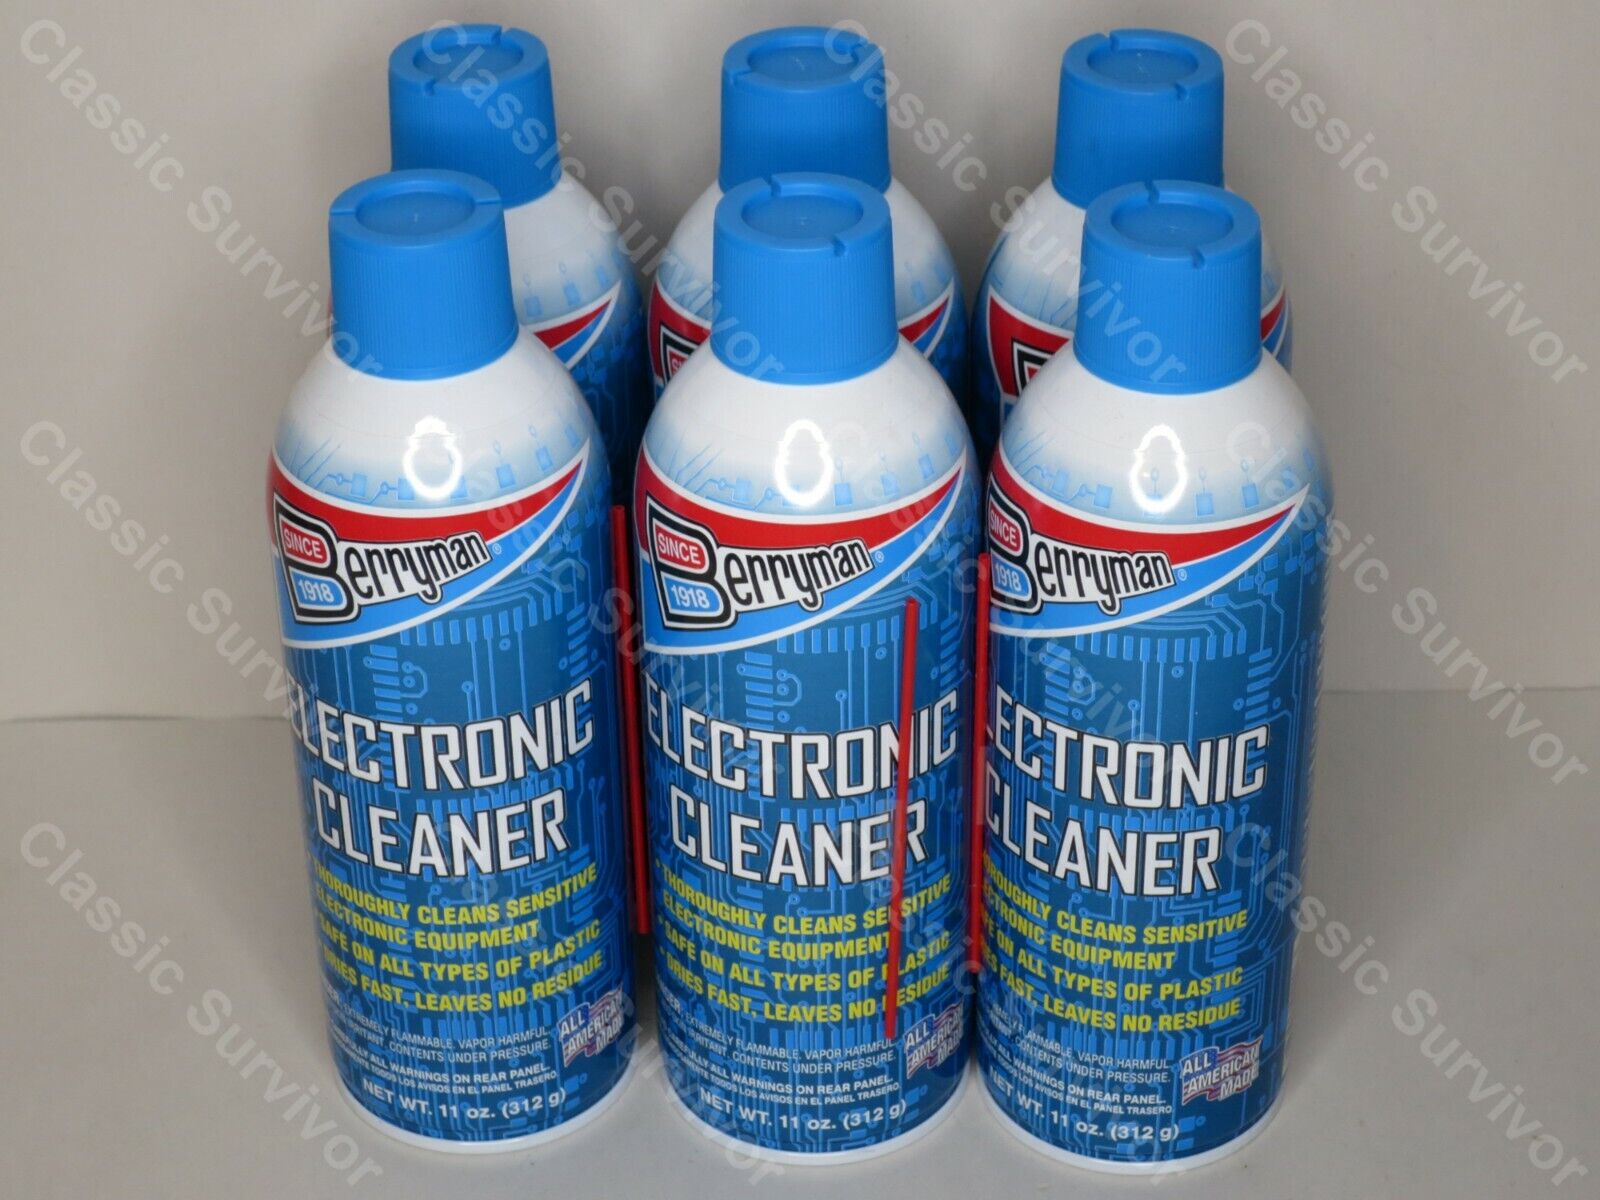 Berryman 2206  Mass Air Flow Sensor & Electronic Cleaner 6oz. Can Case of 6 Cans